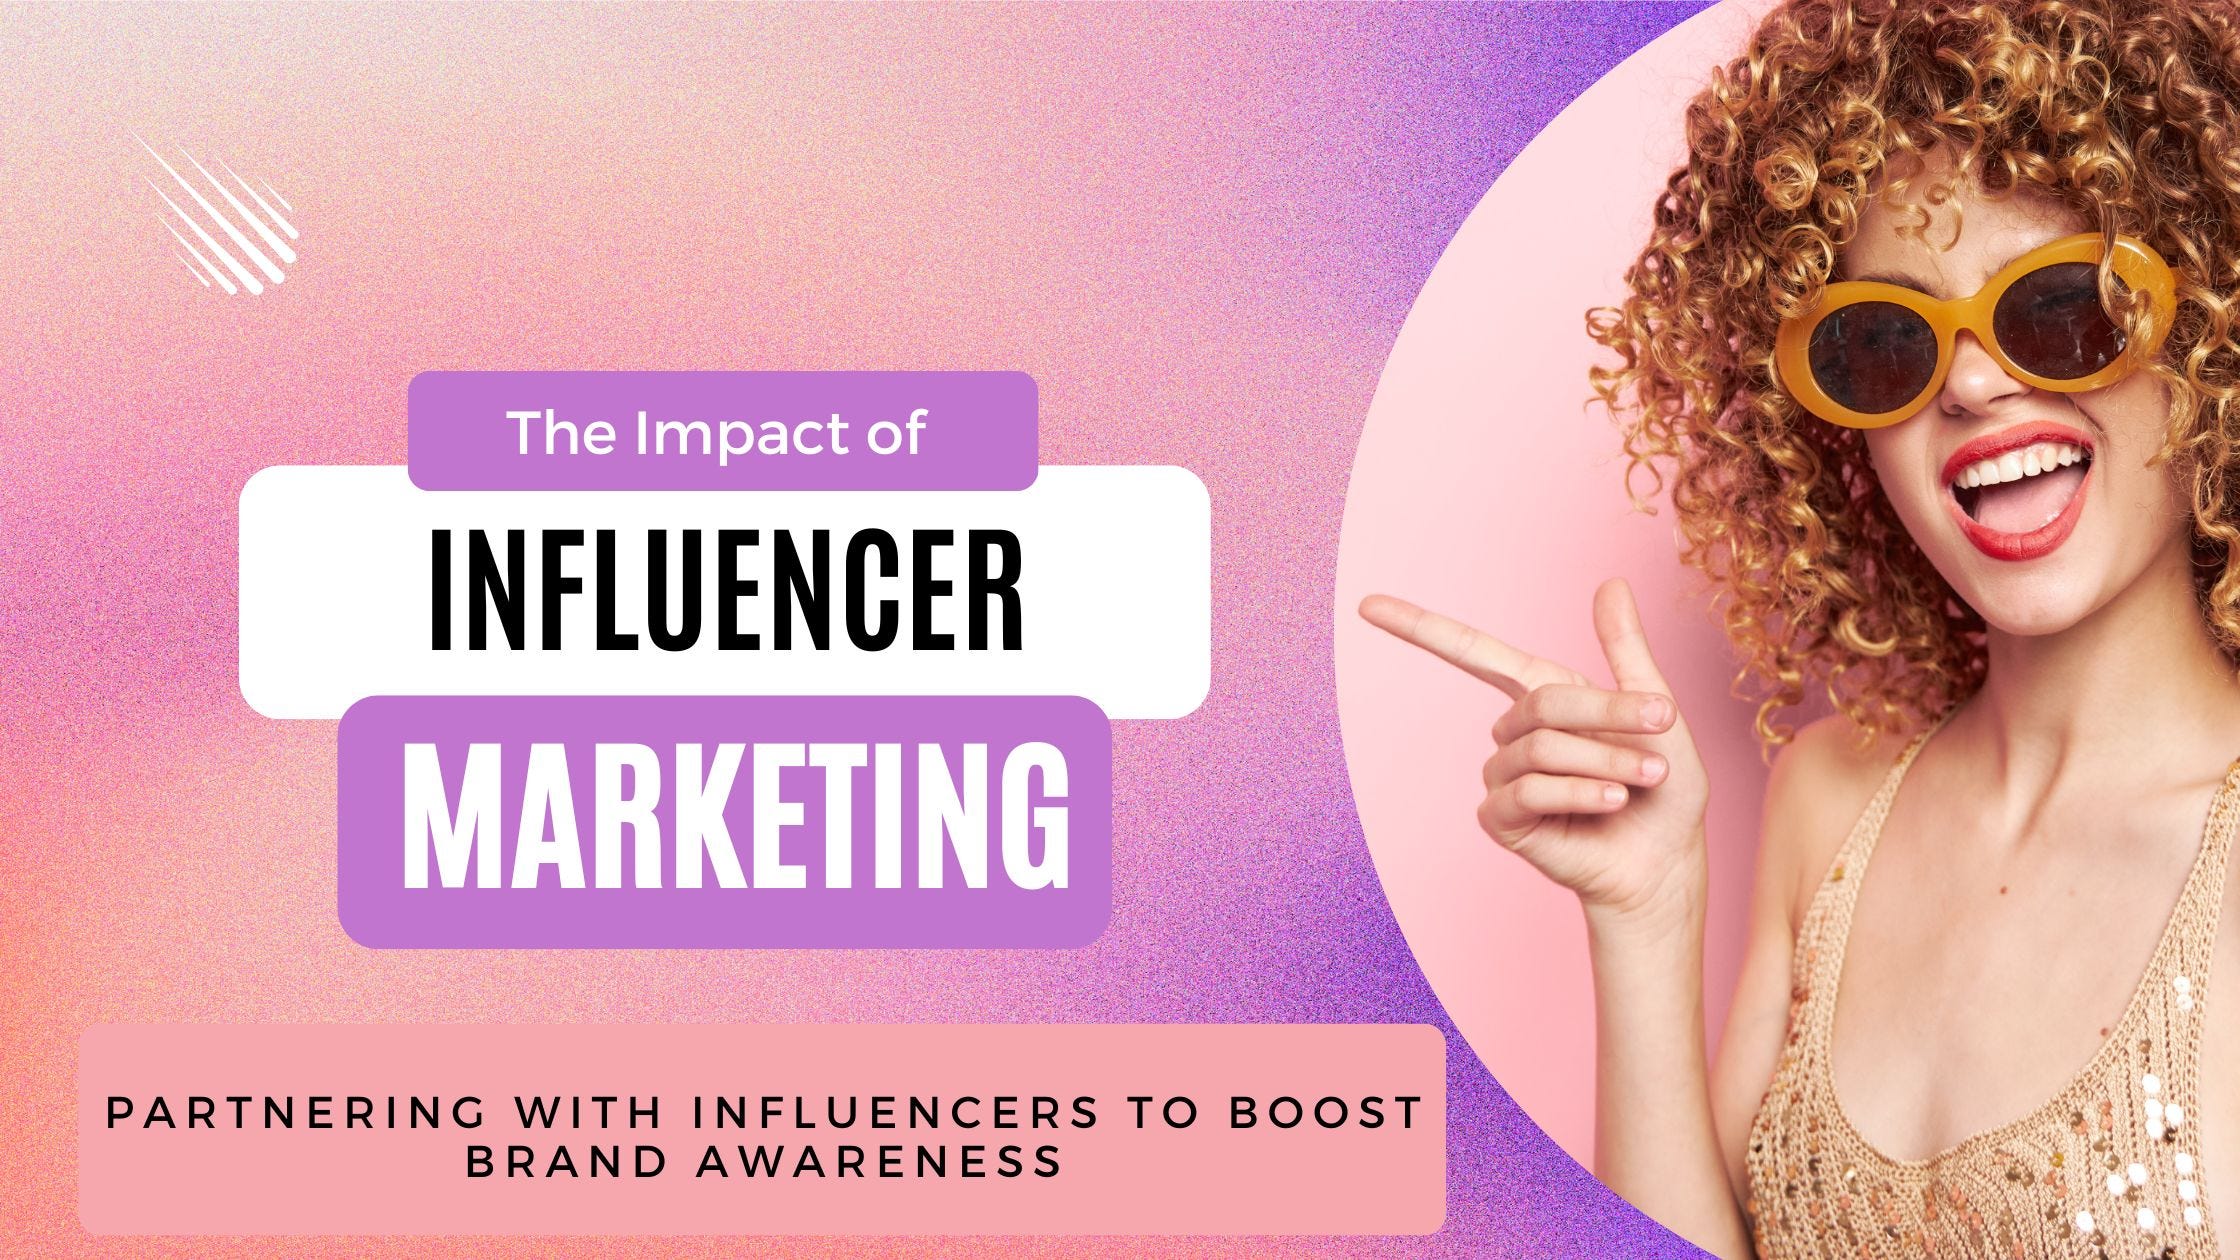 The Role of Influencer Marketing in a Comprehensive Marketing Strategy